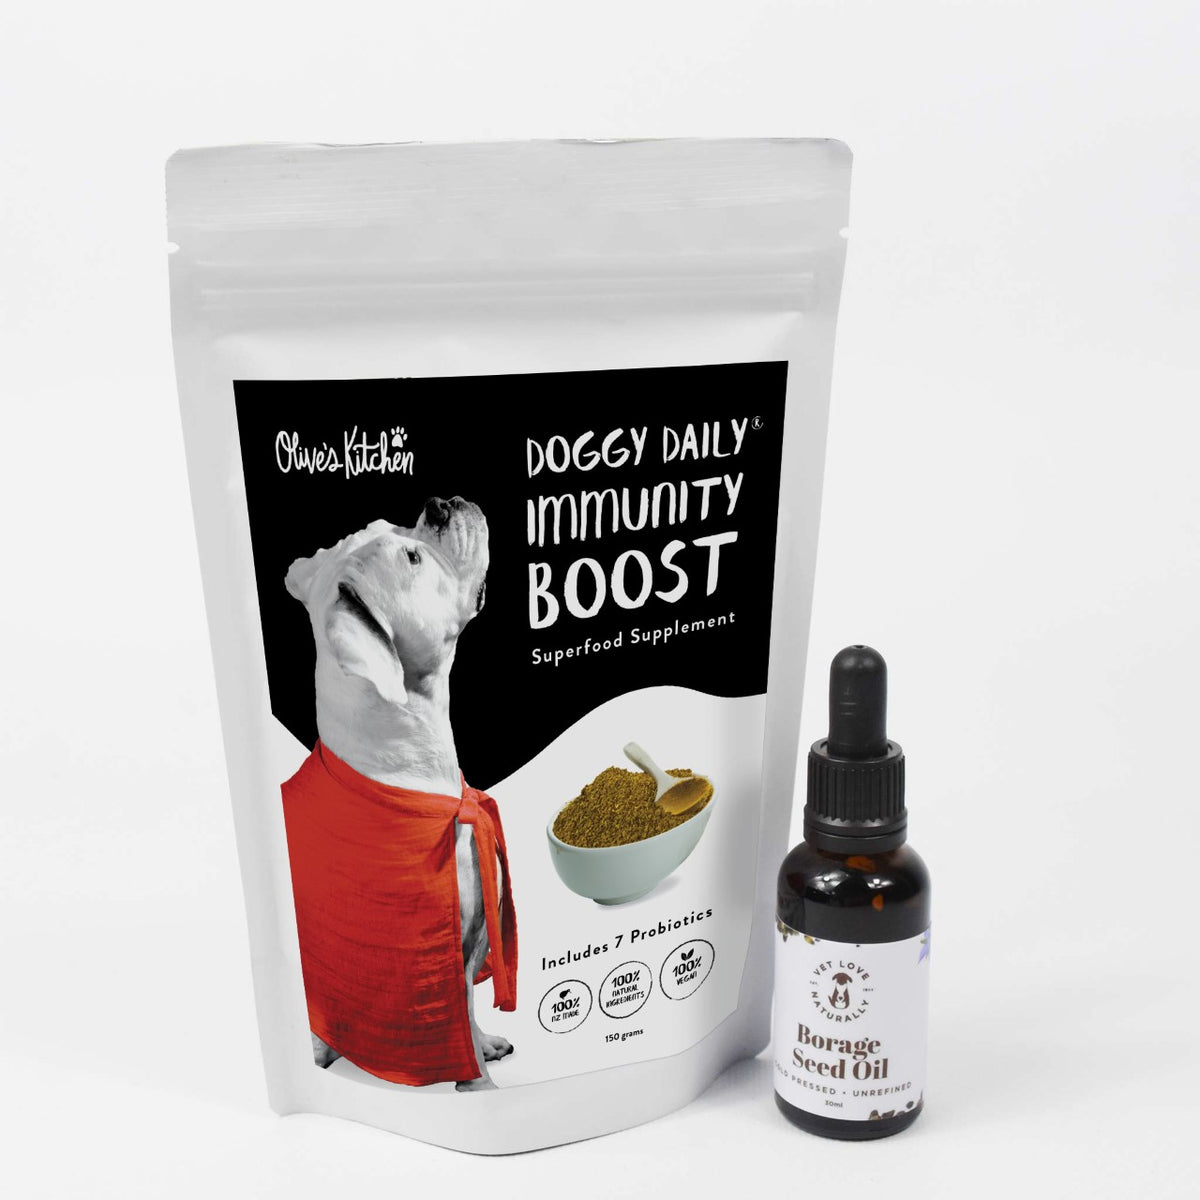 The Doggy Daily 150gm and Borage Seed oil